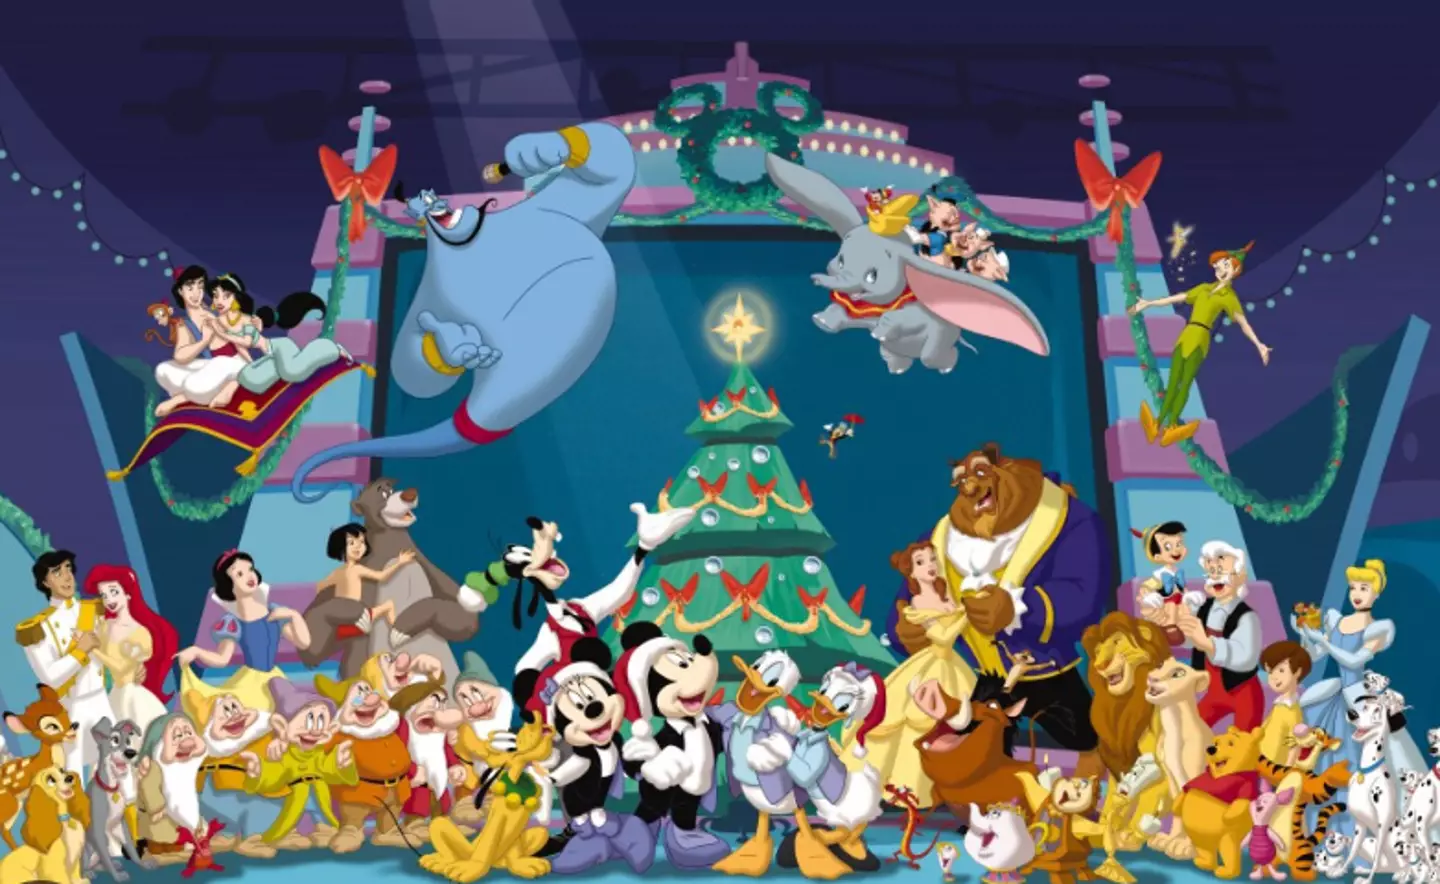 With all your favourite Disney characters what more could you possibly want from Christmas this year?